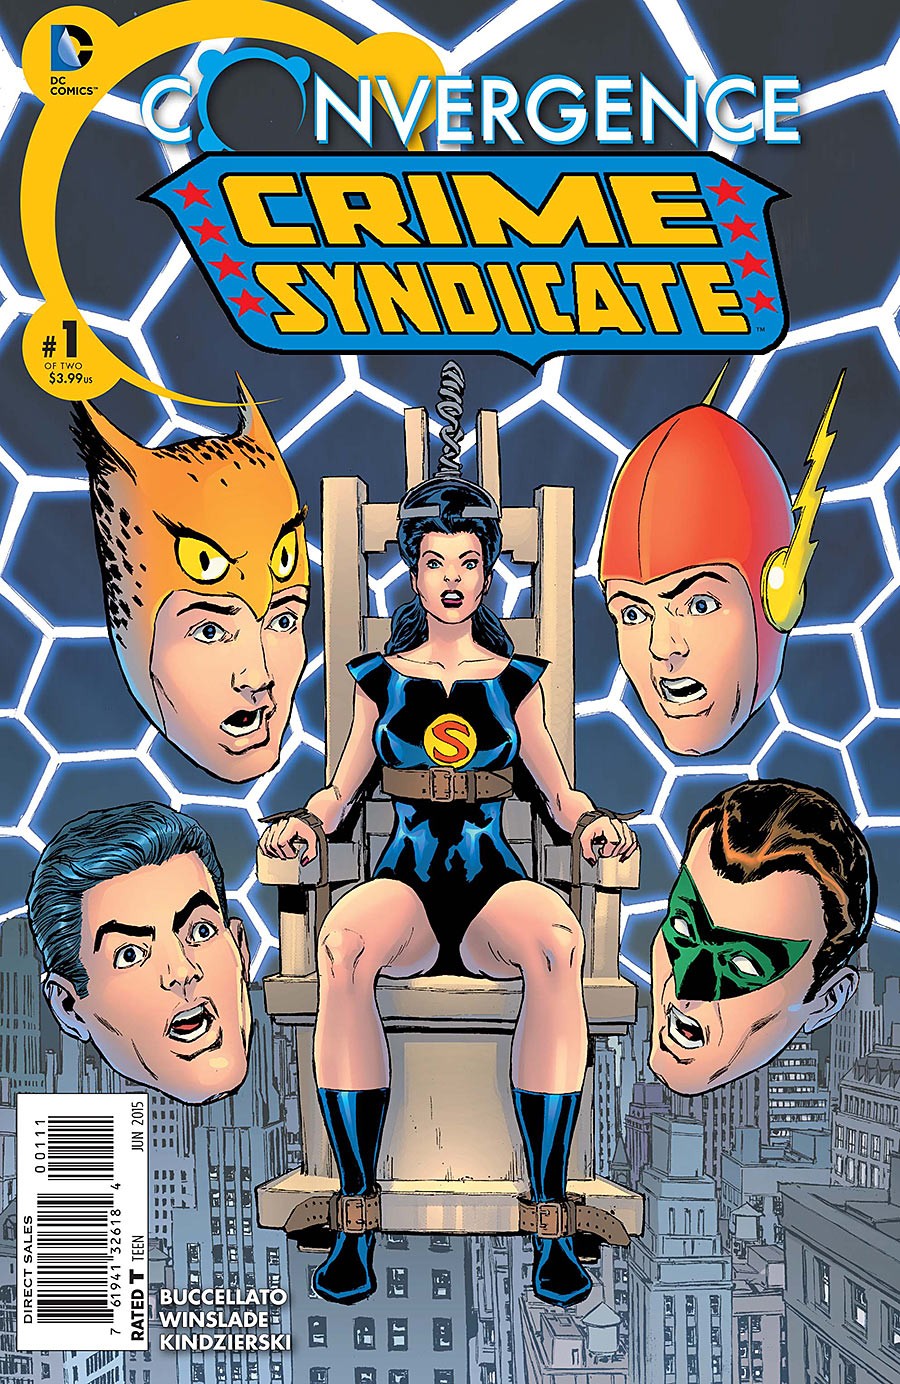 Convergence: Crime Syndicate Vol. 1 #1